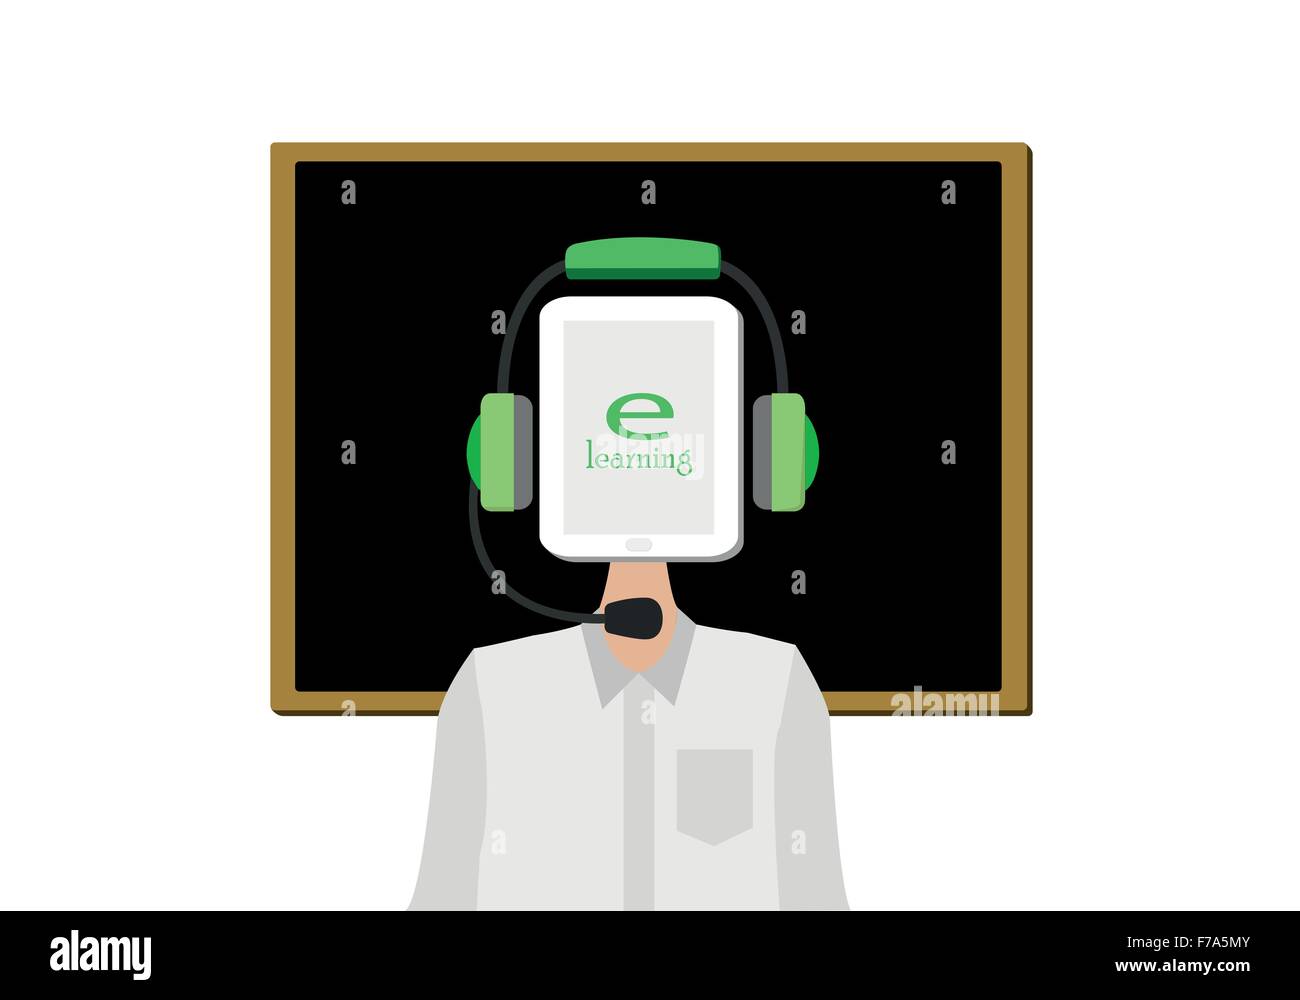 E-learning concept with tutor vector illustration Stock Vector